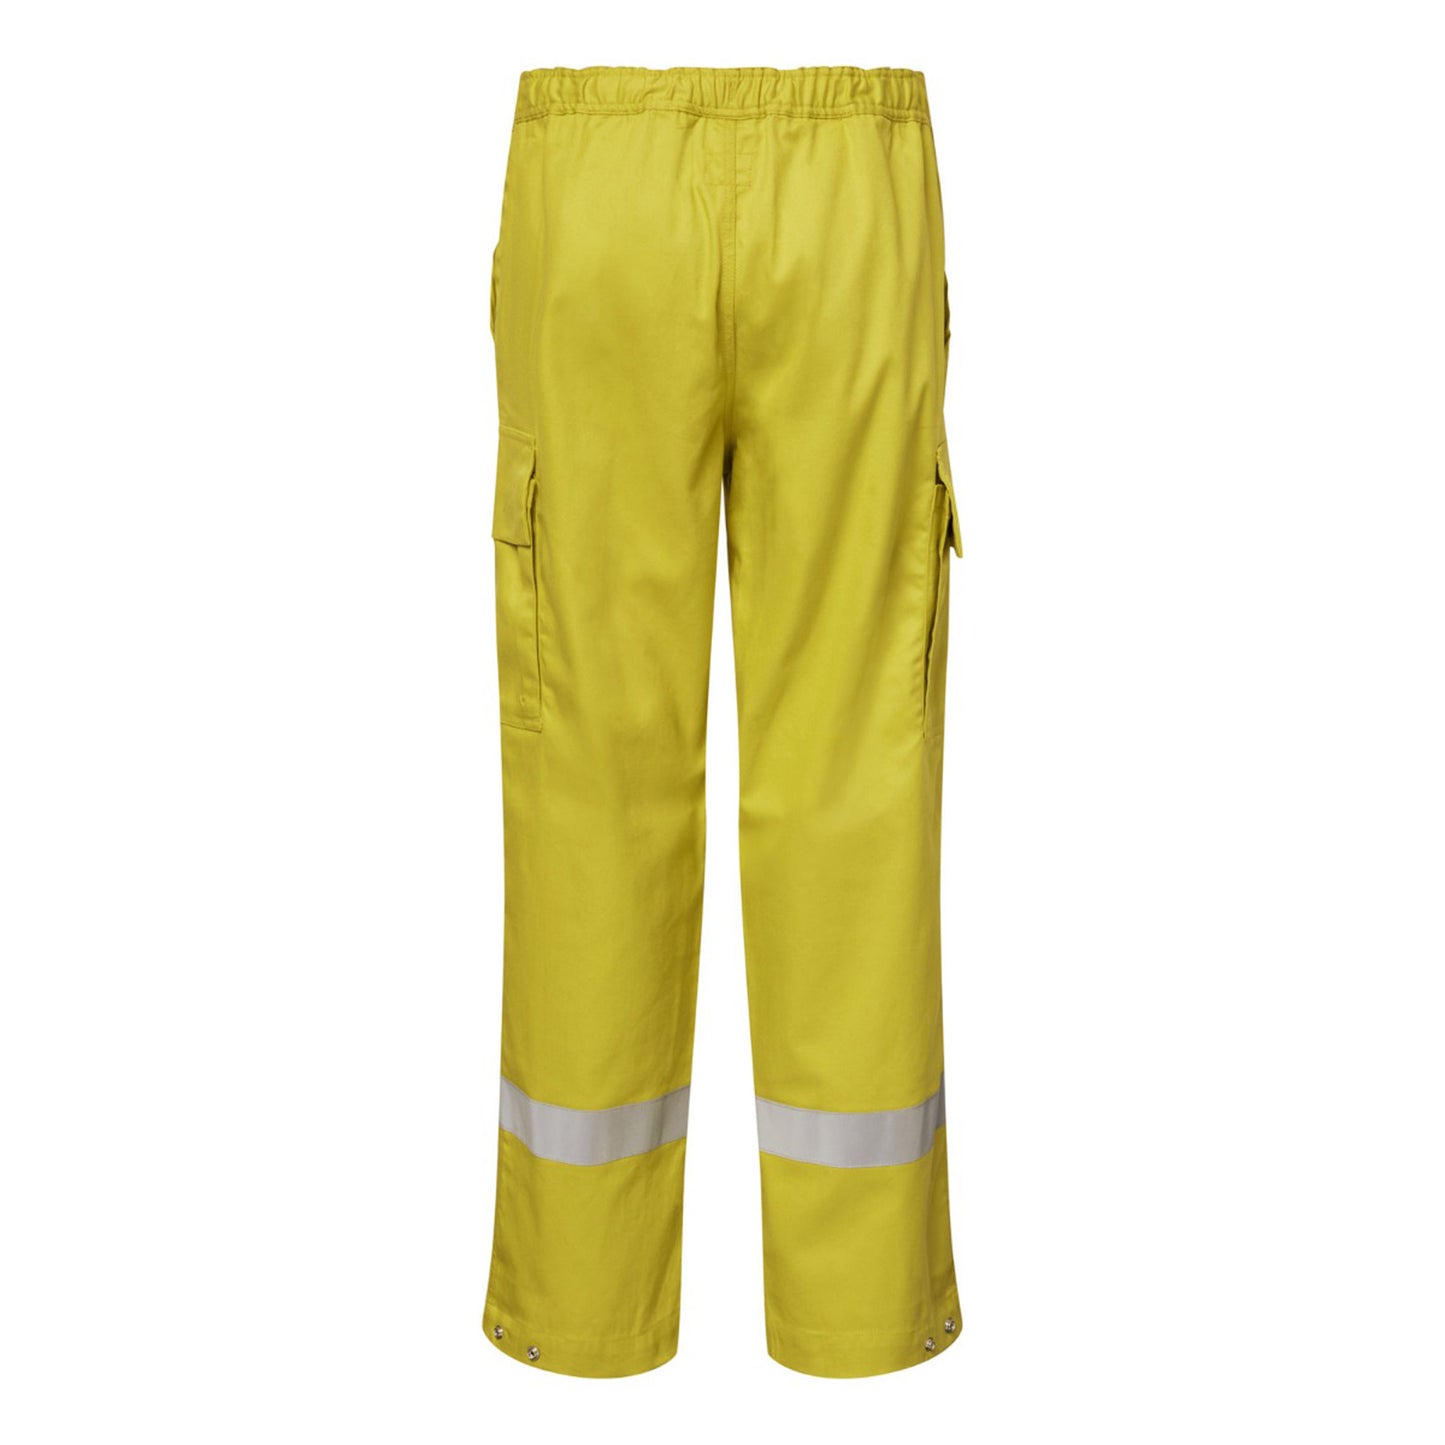 Ranger Reflective Fire Fighting Trousers - made by FlameBuster